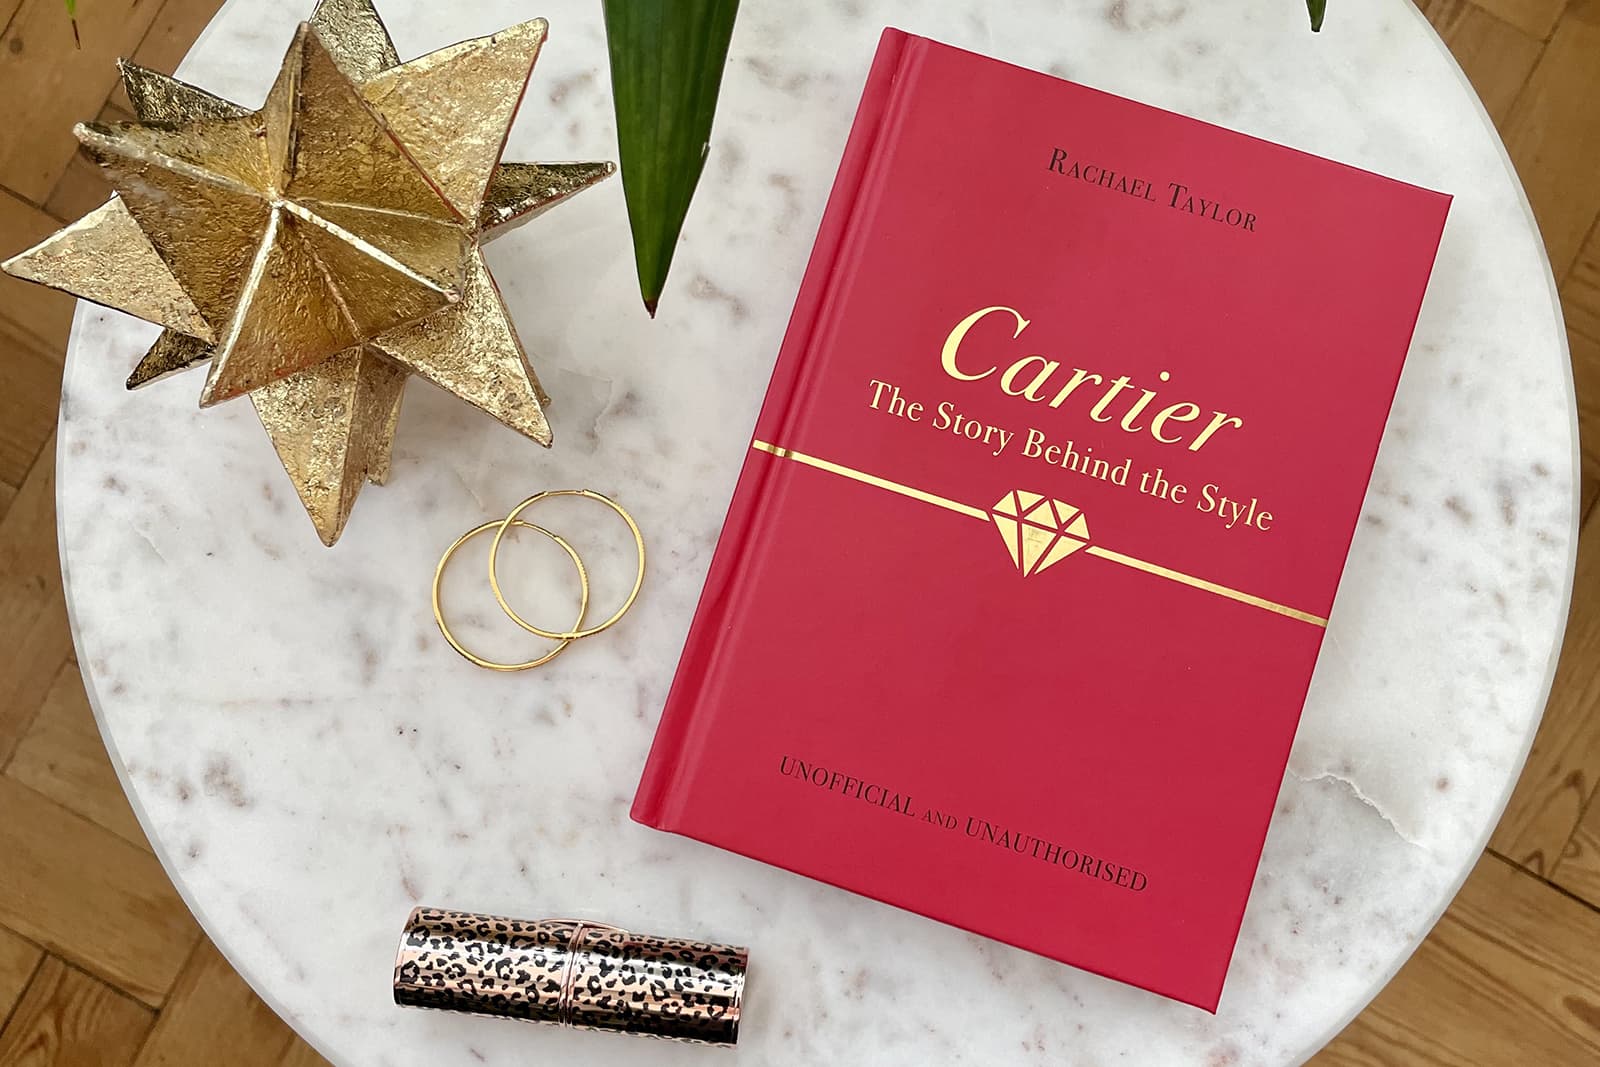 Book Review: Cartier in the 20th Century - Gem Gossip - Jewelry Blog